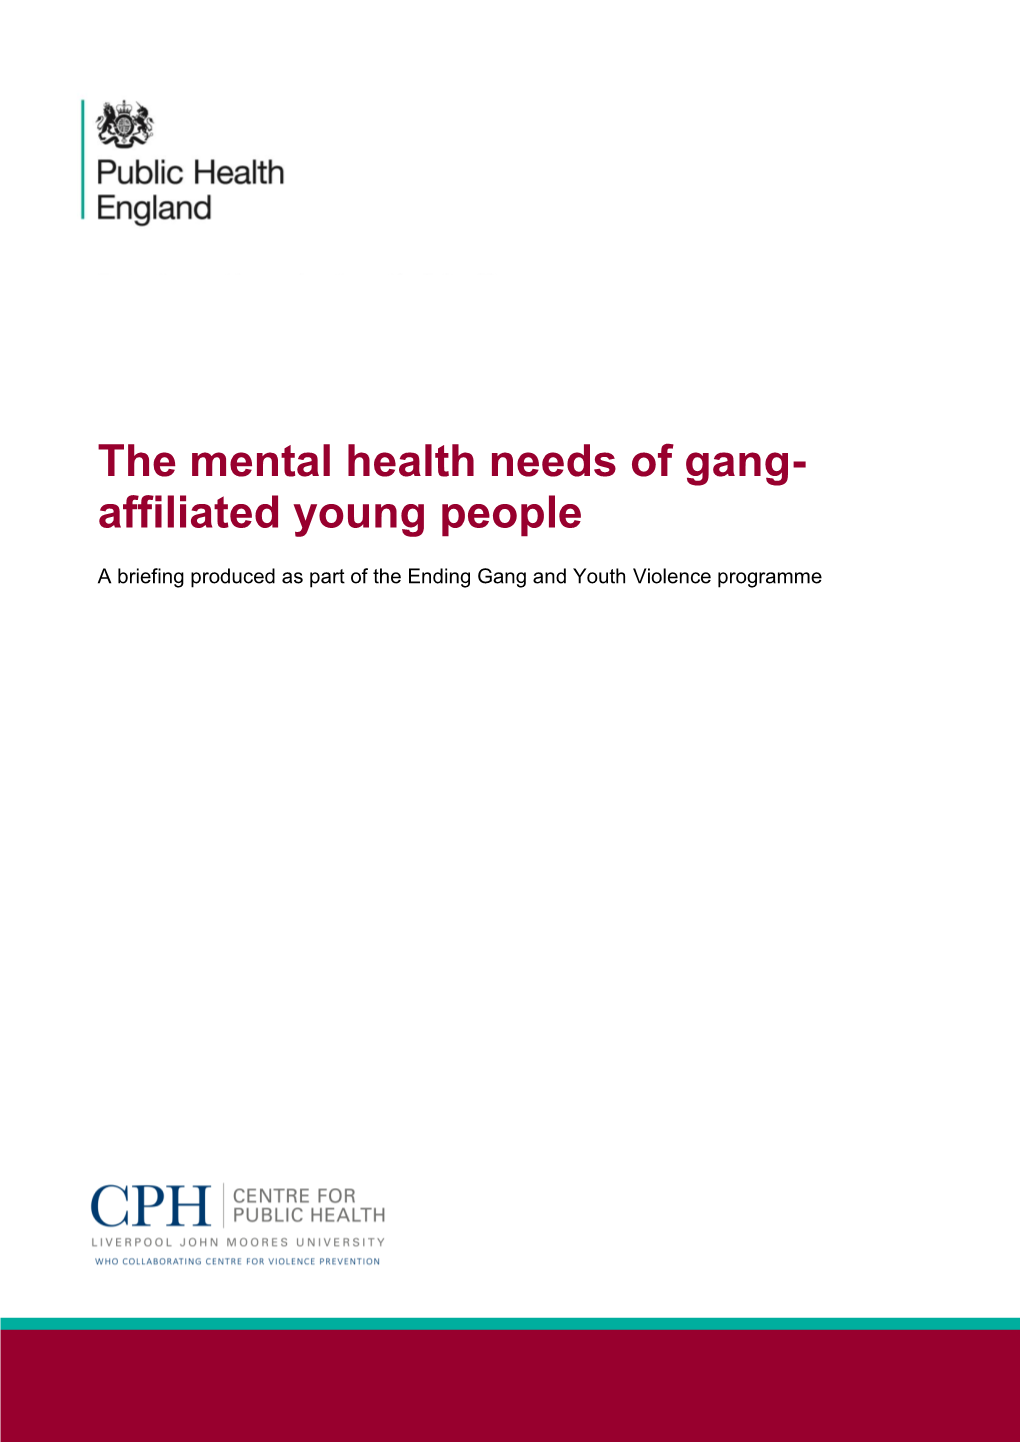 The Mental Health Needs of Gang-Affiliated Young People